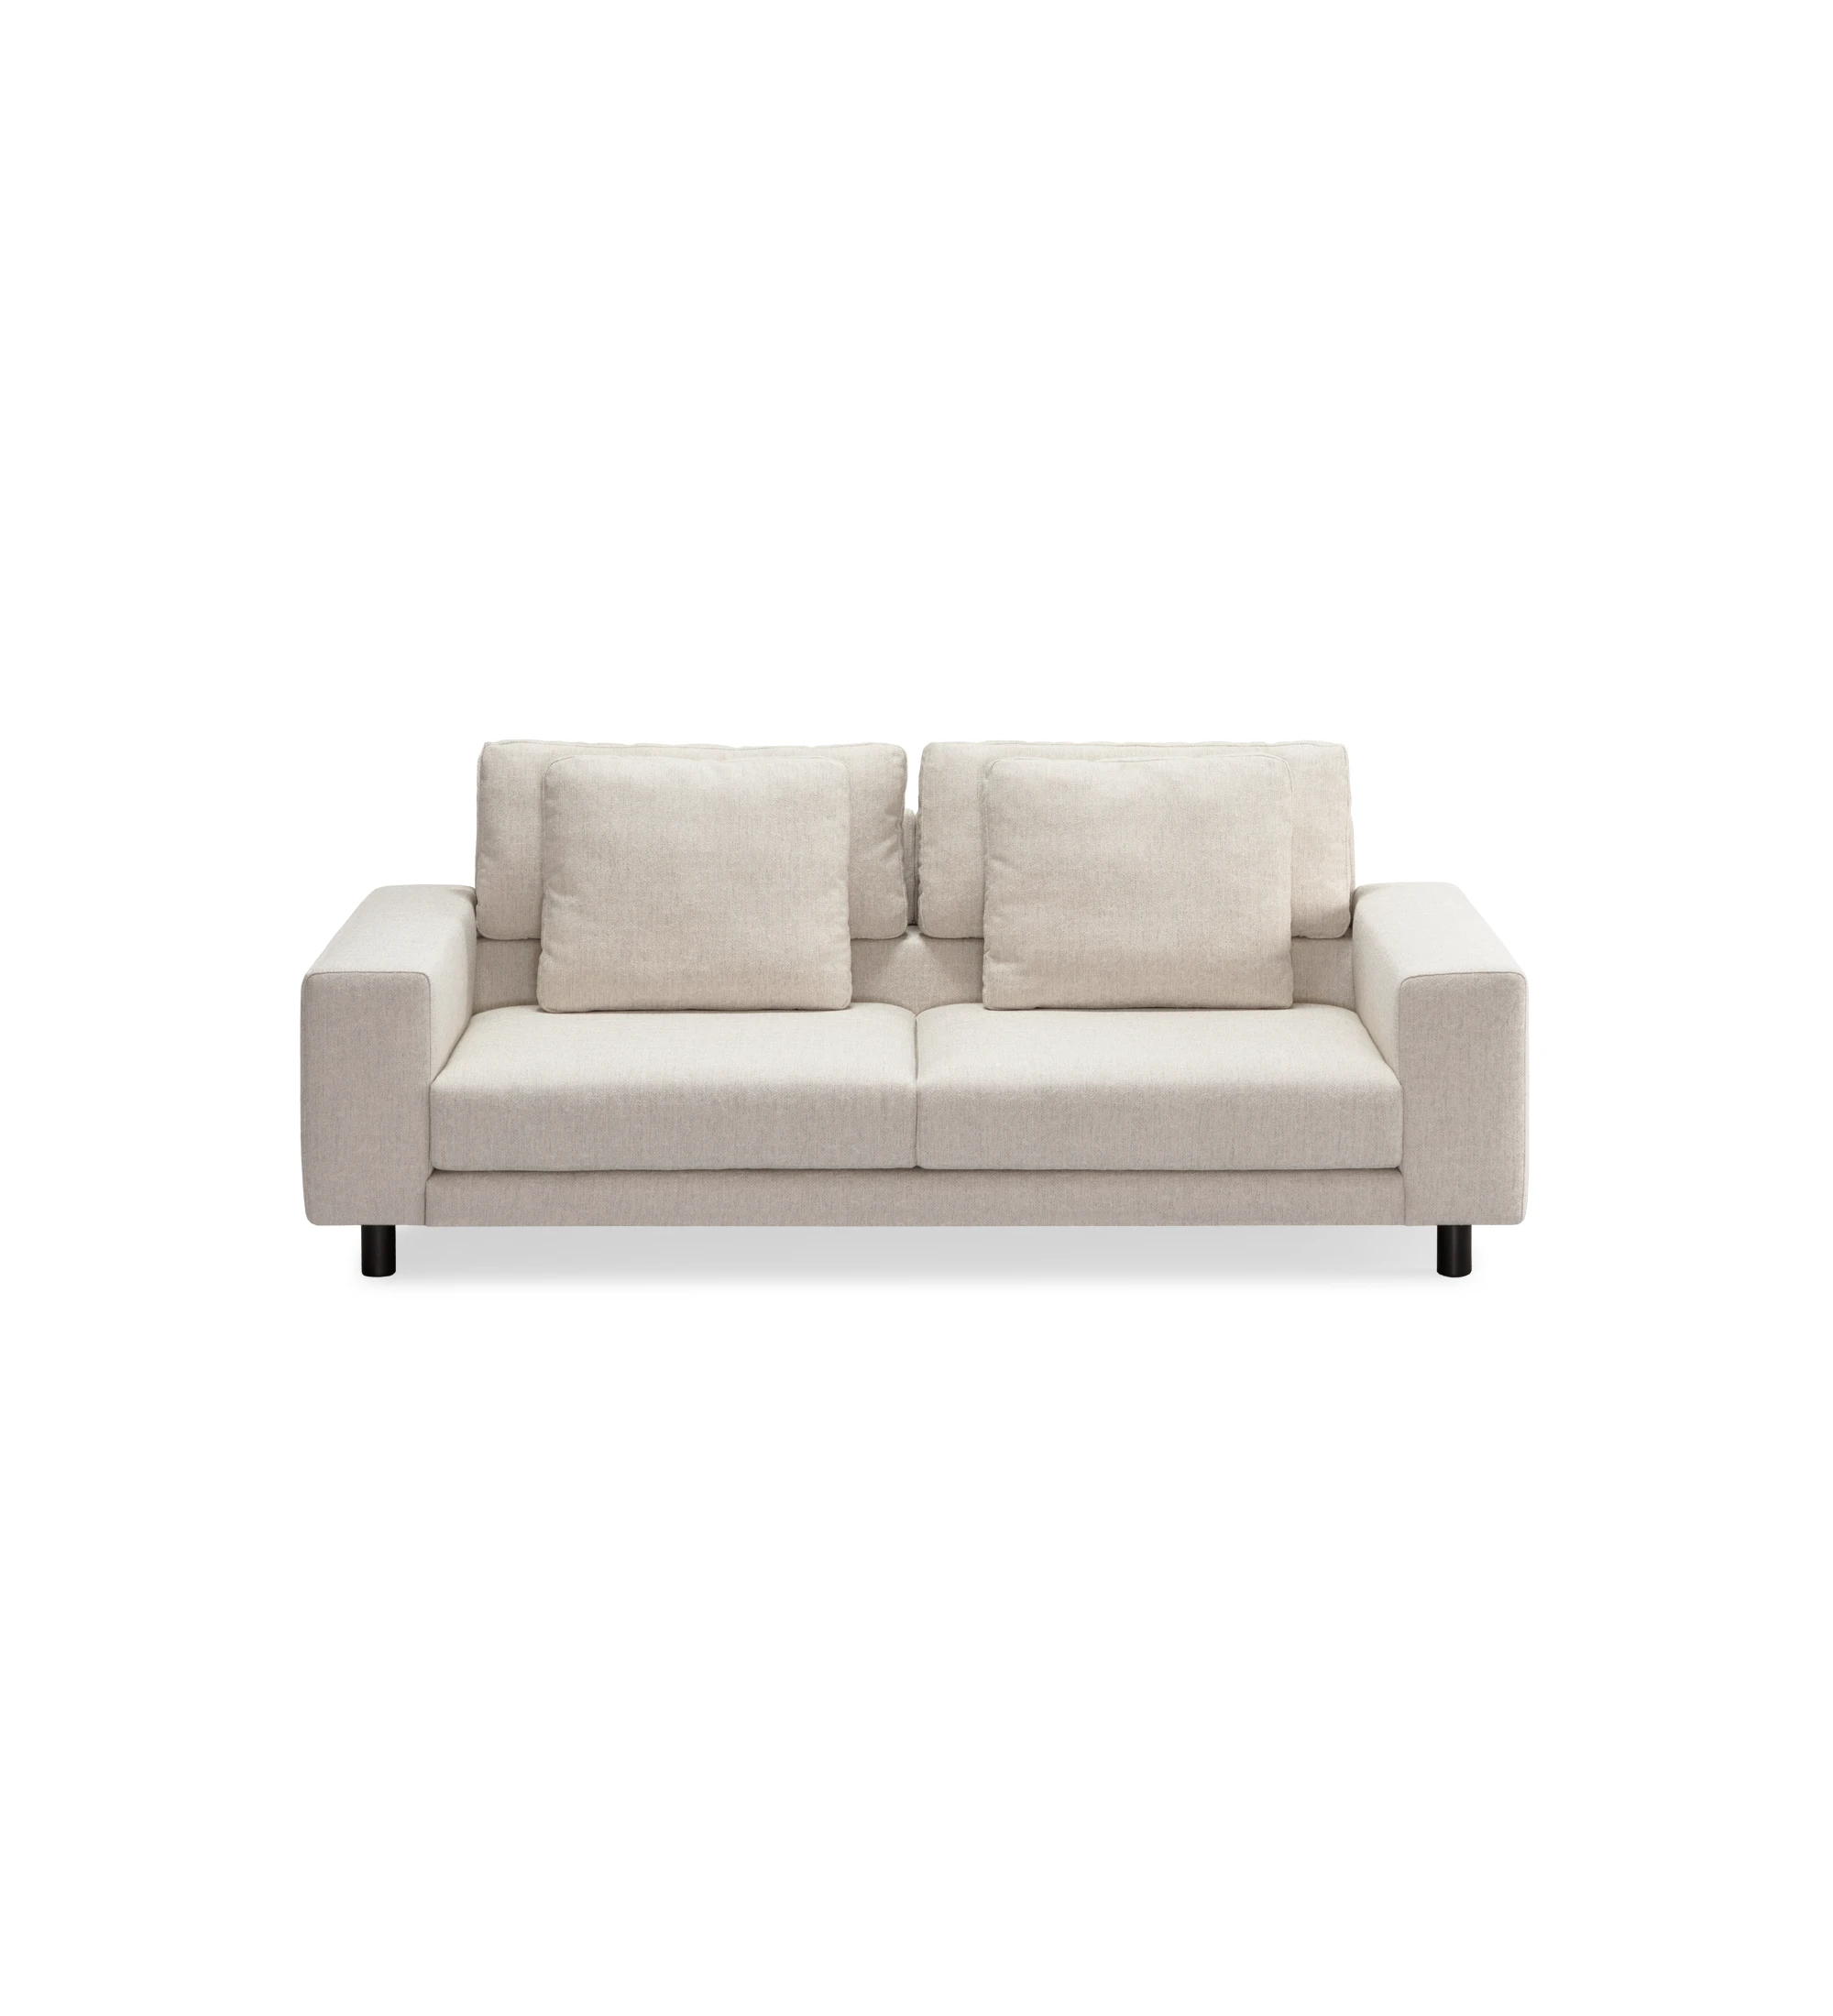 Dallas 3-seater sofa upholstered in beige fabric, folding back cushions, black lacquered feet, 225 cm.